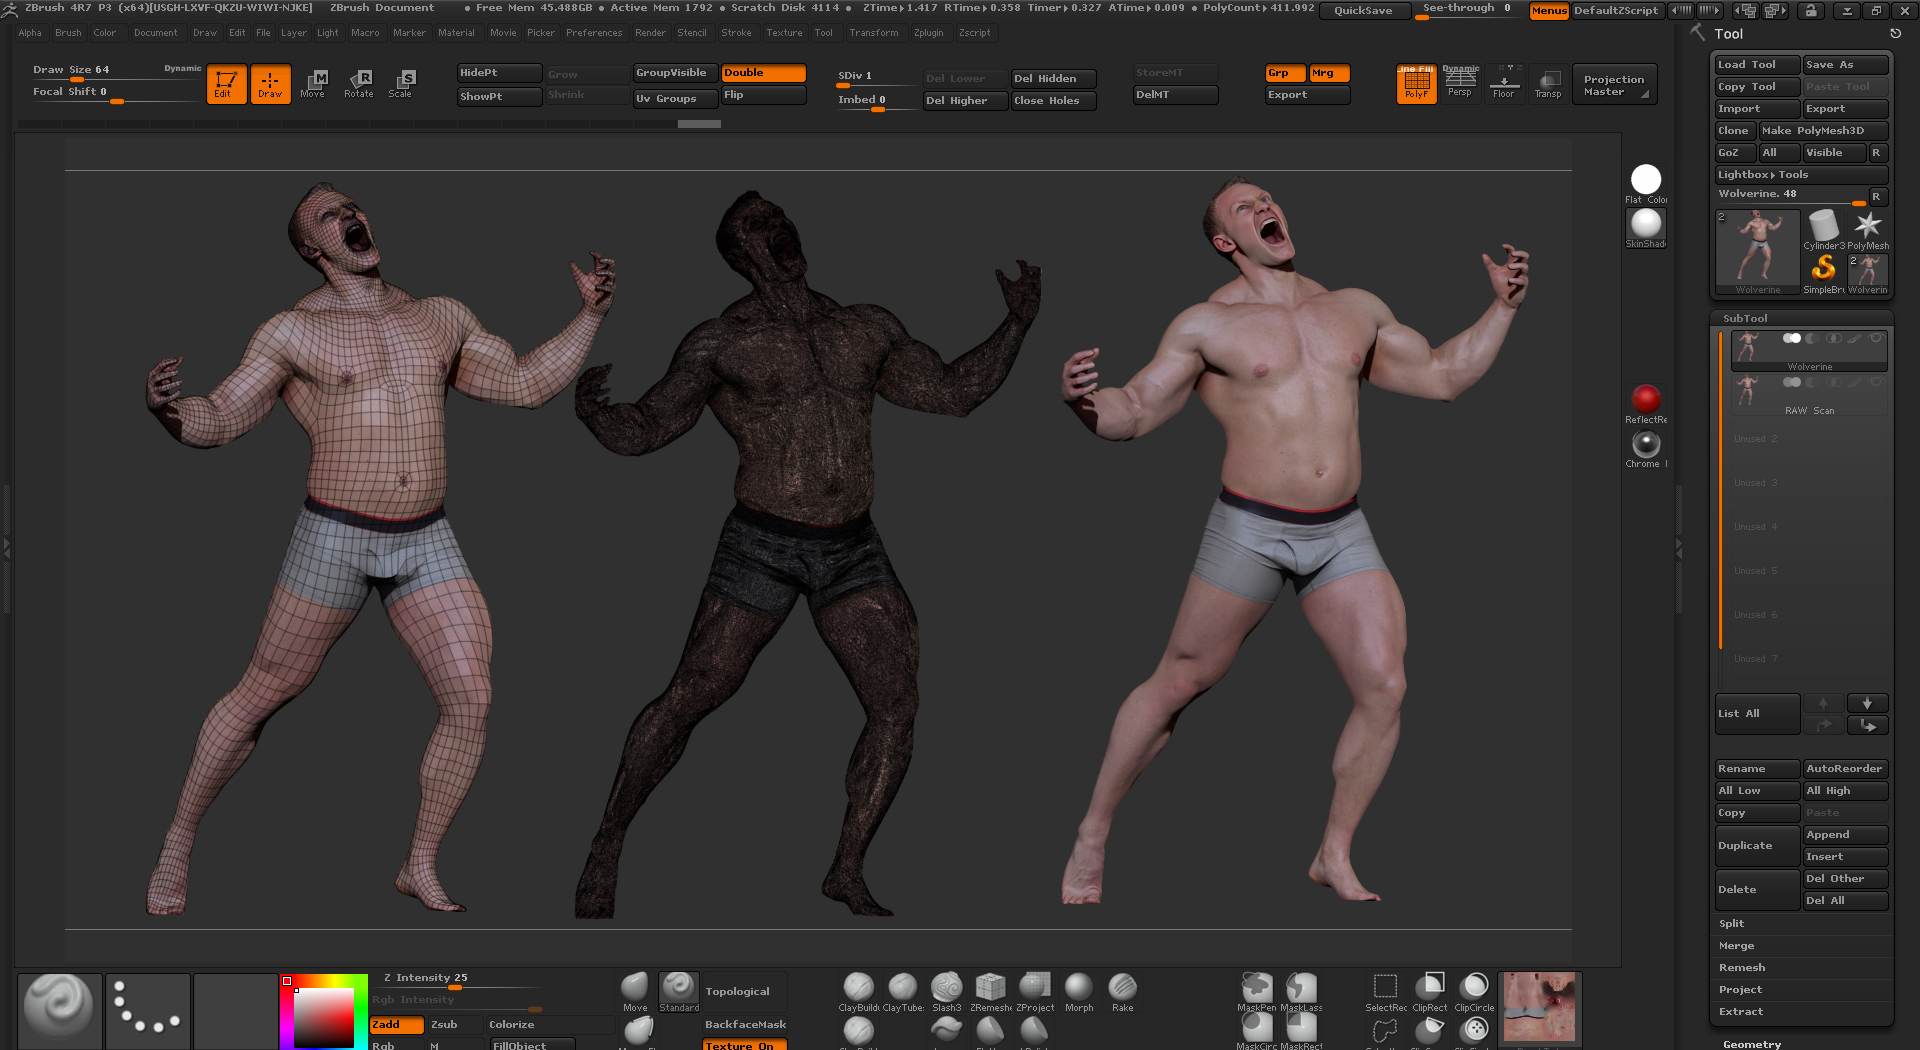 Free 3D Scans of Male Figure from Ten24 with ZBrush, tutorial included